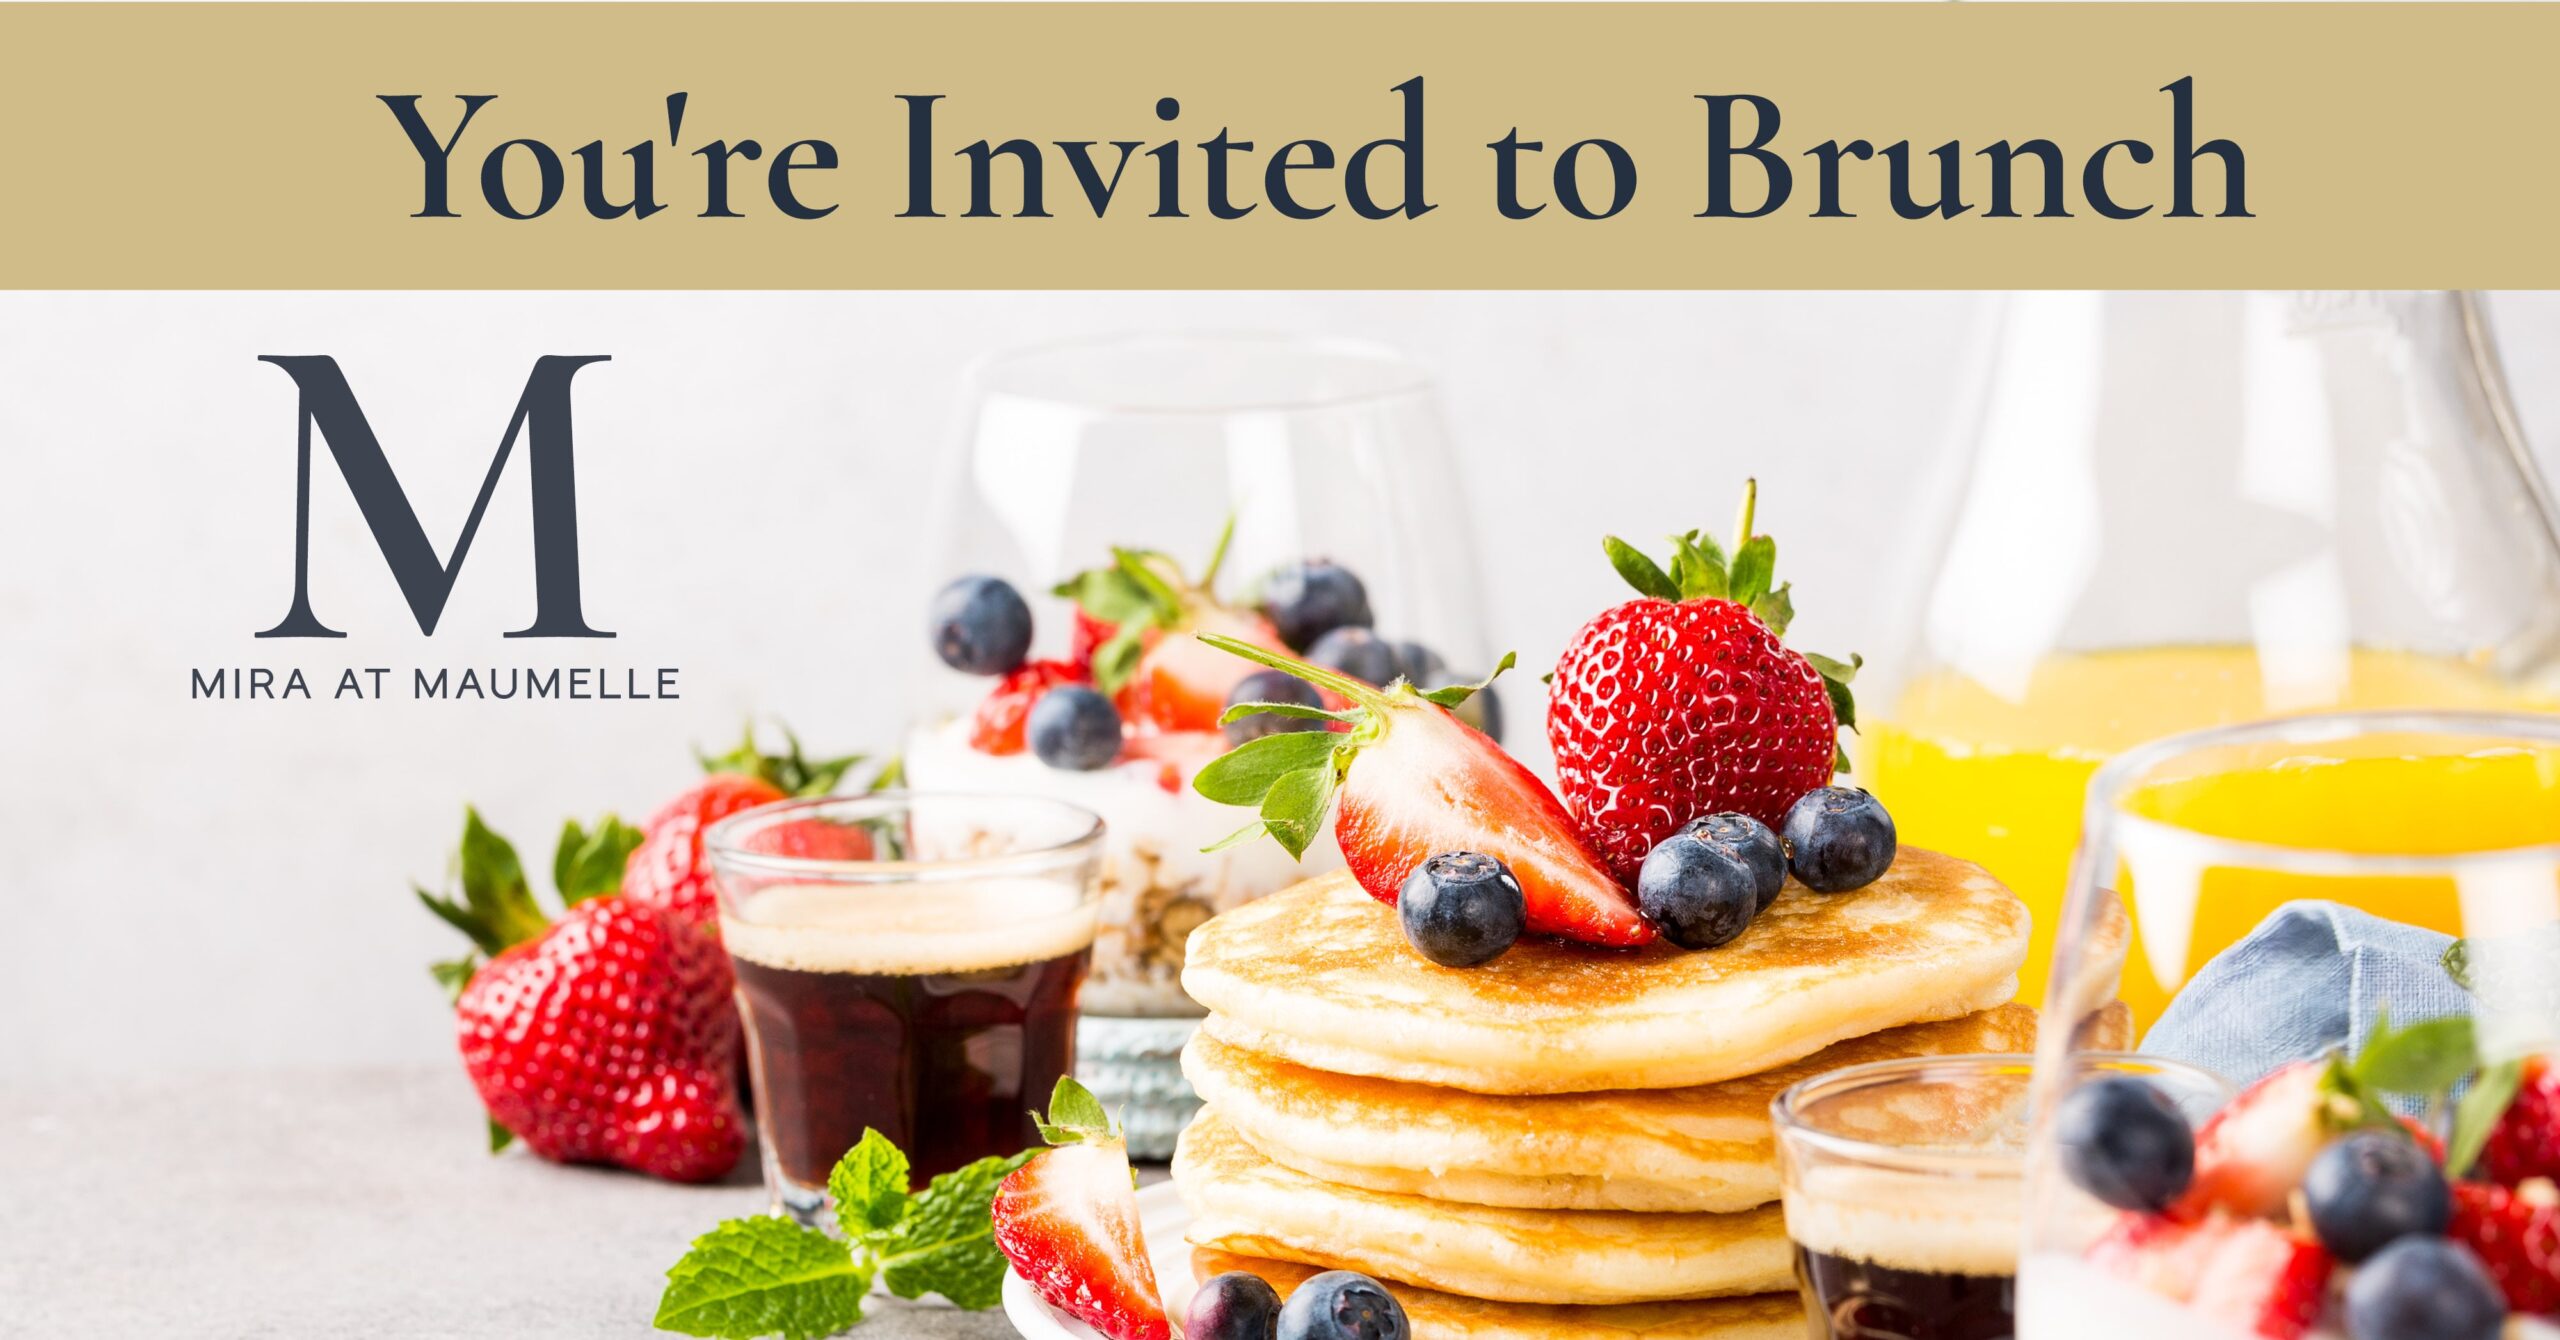 You’re Invited to Brunch